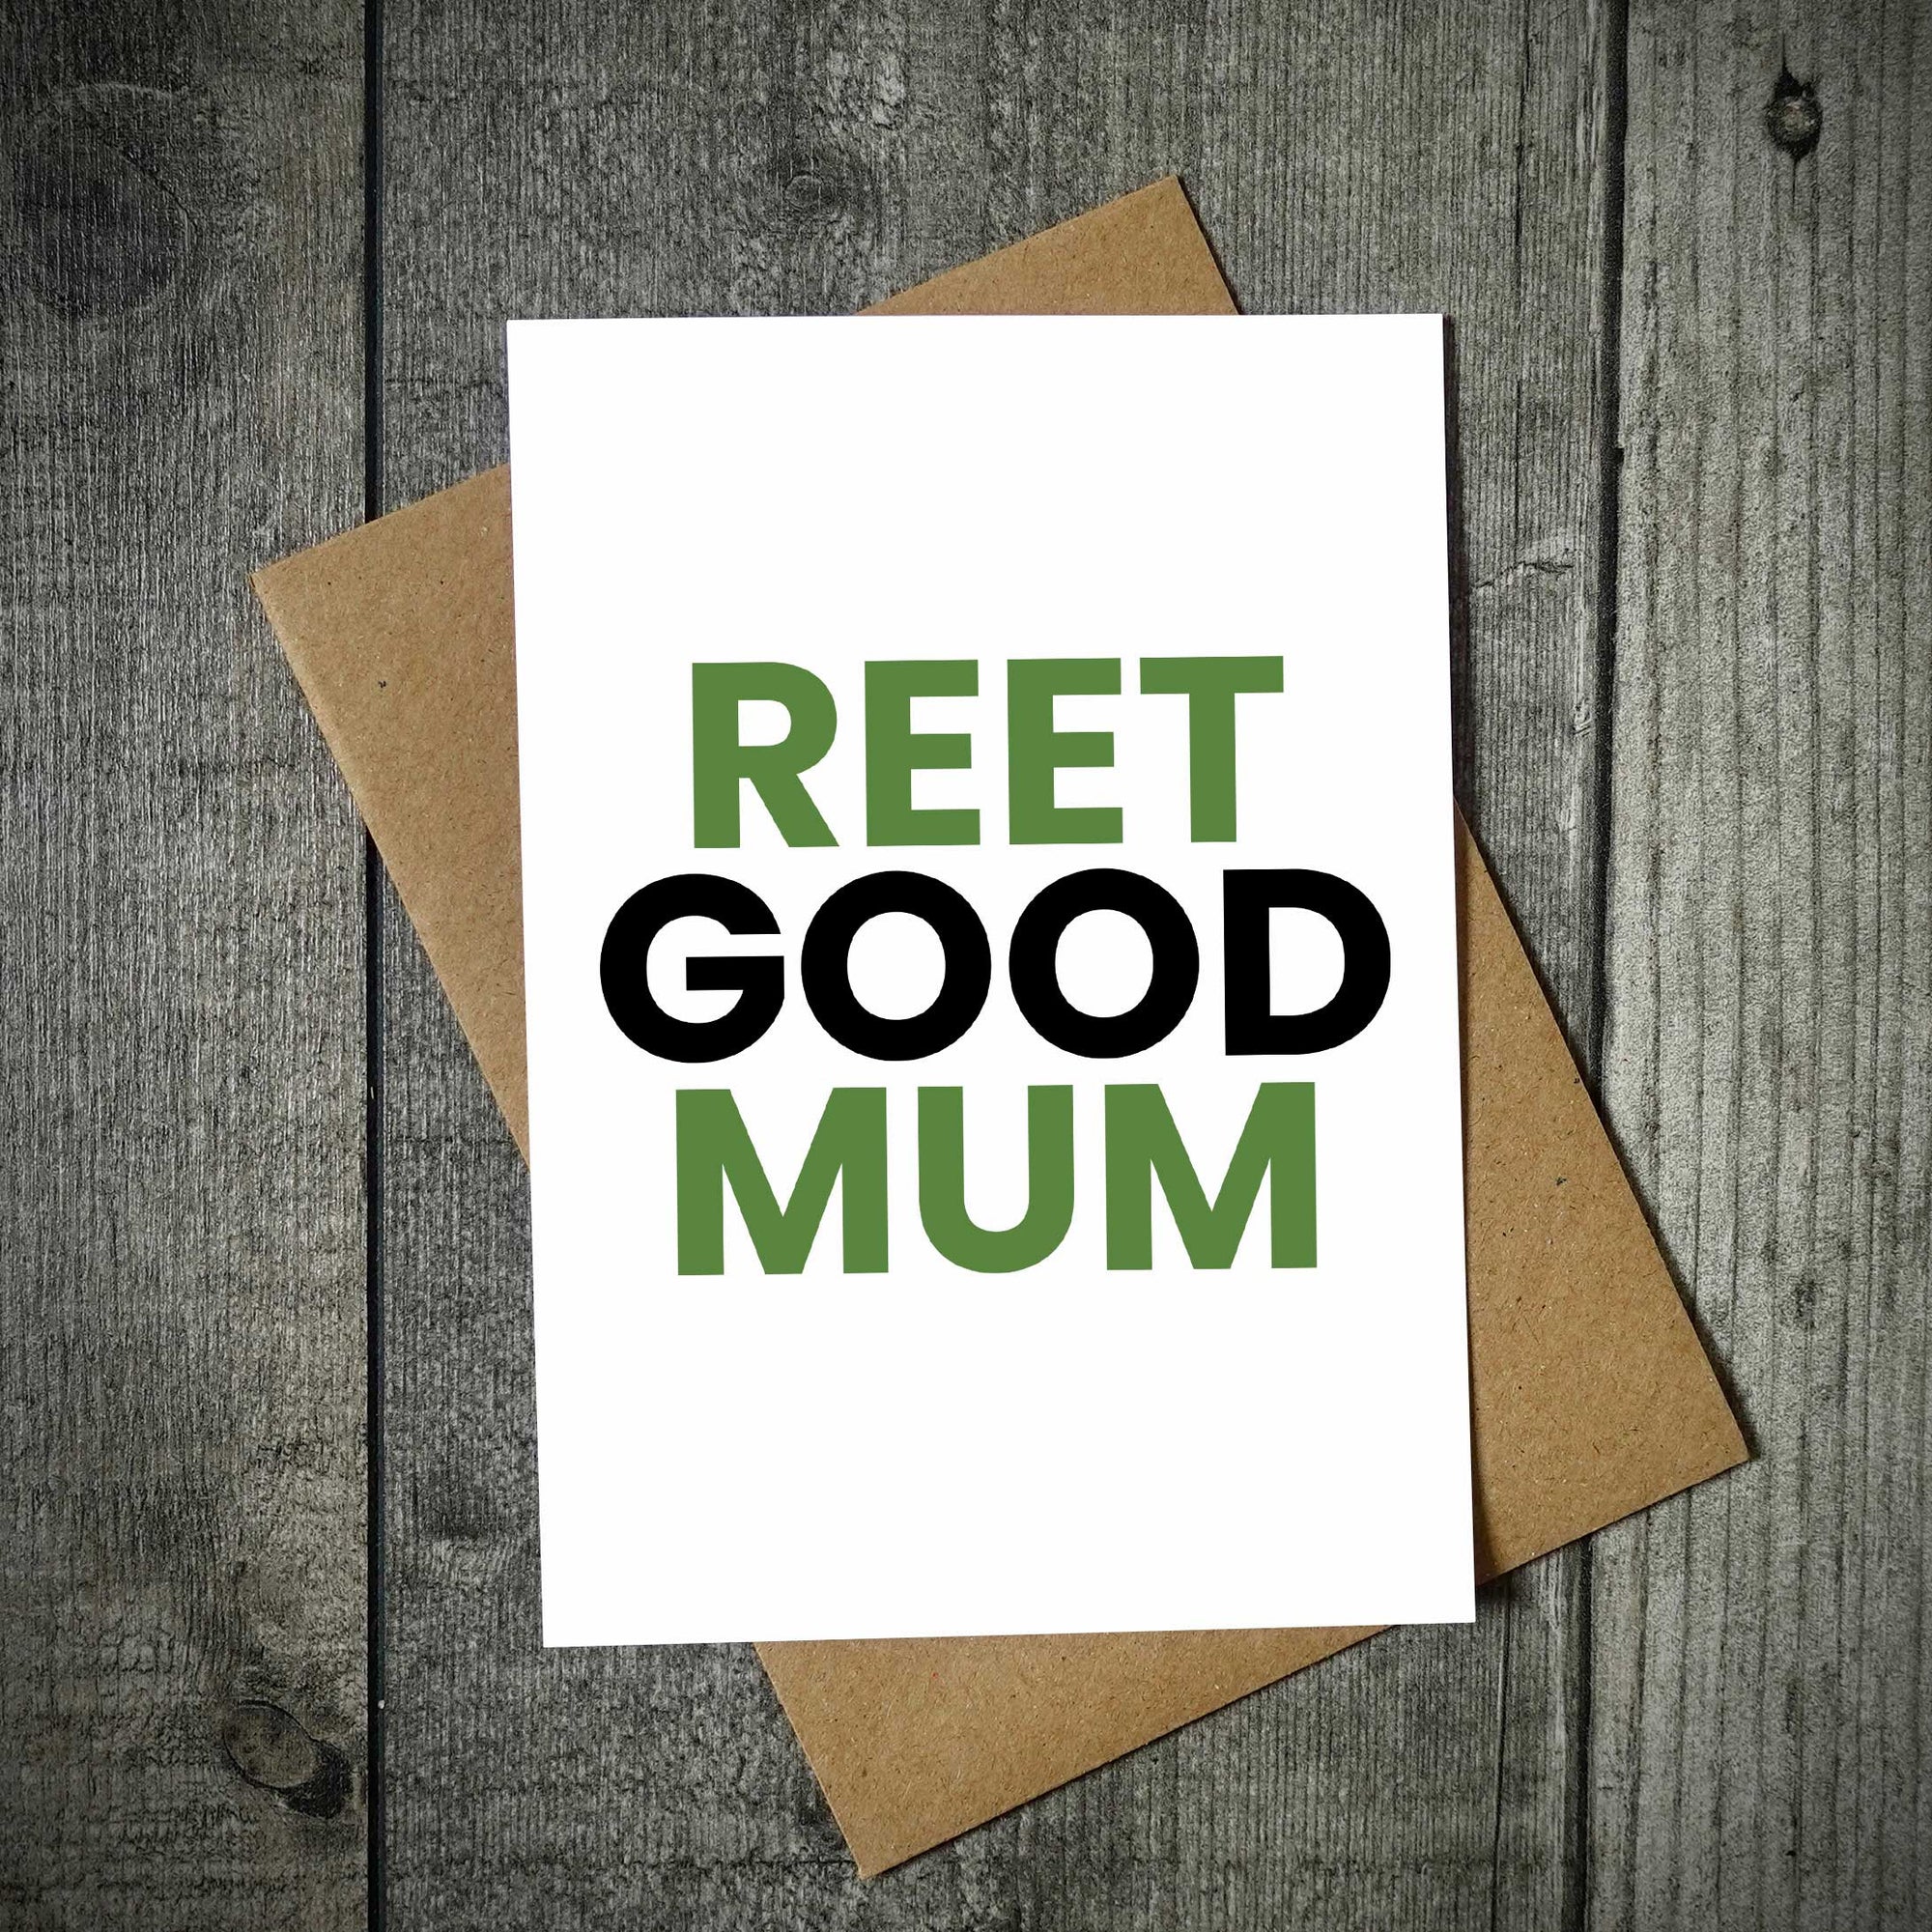 Reet Good Mum Yorkshire Mother's Day Card